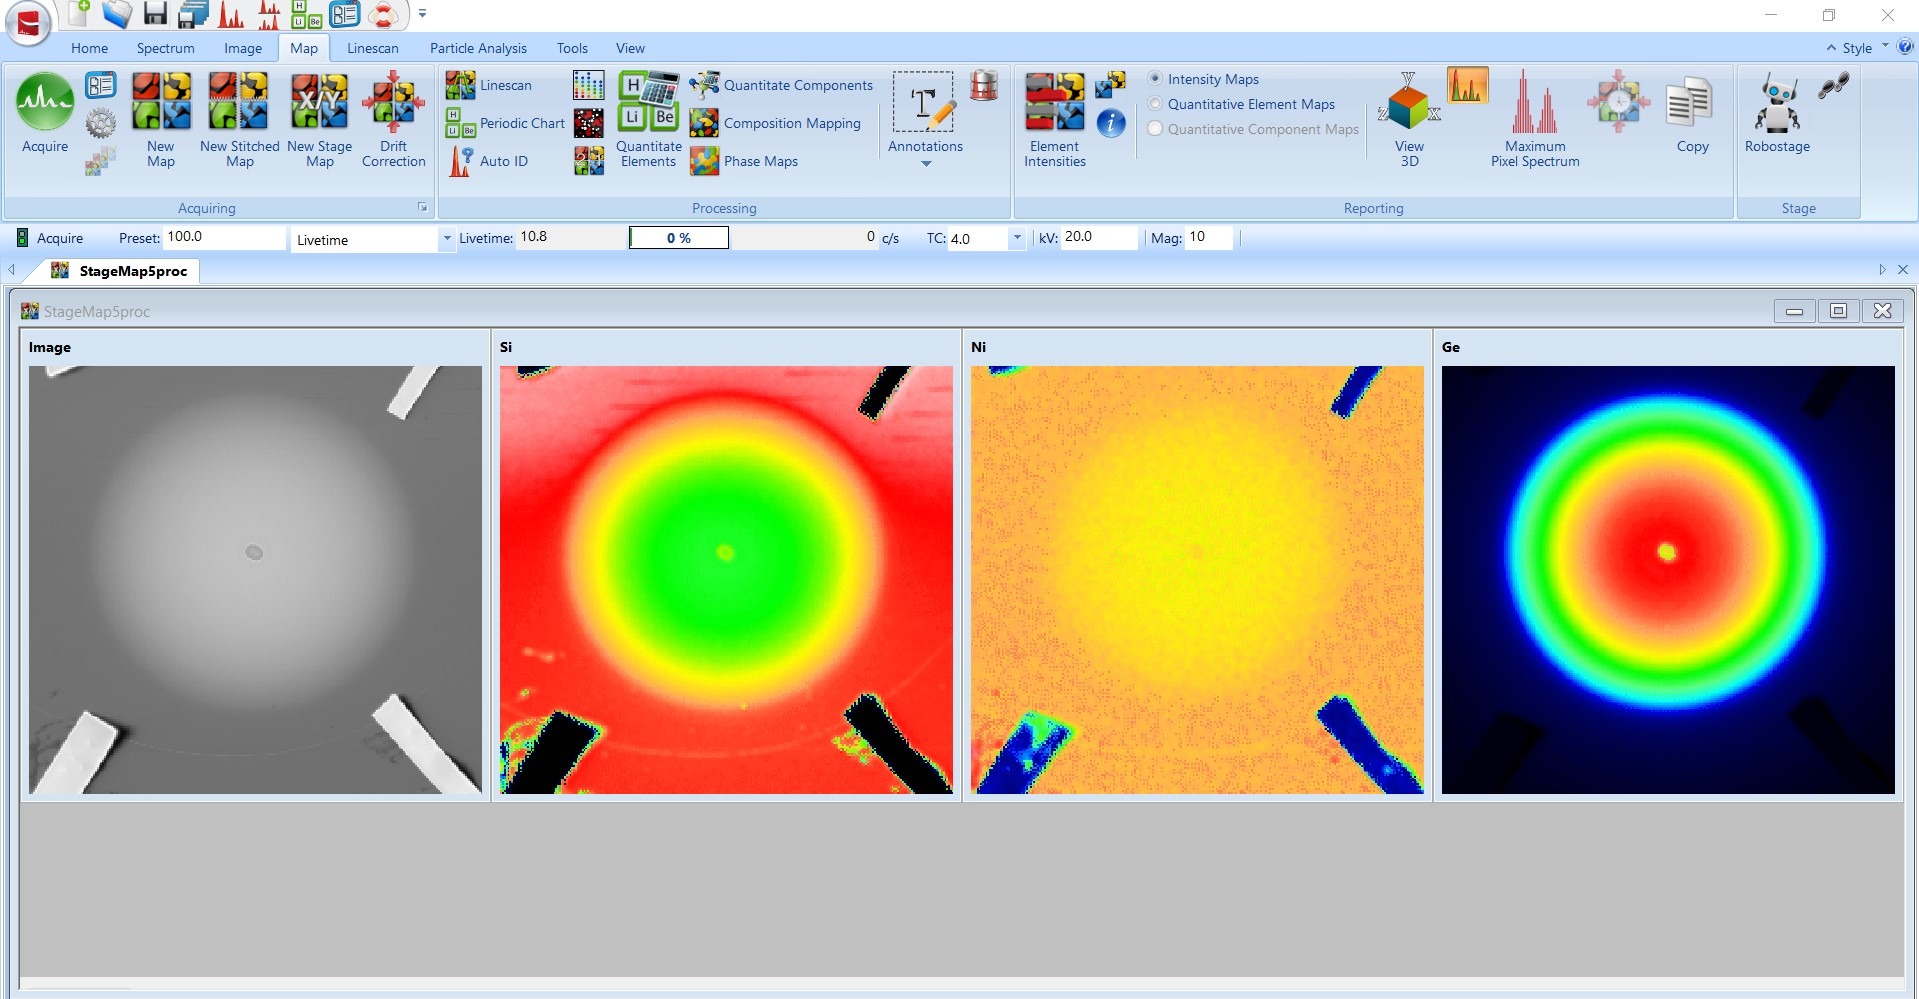 Thermal / Heat Maps